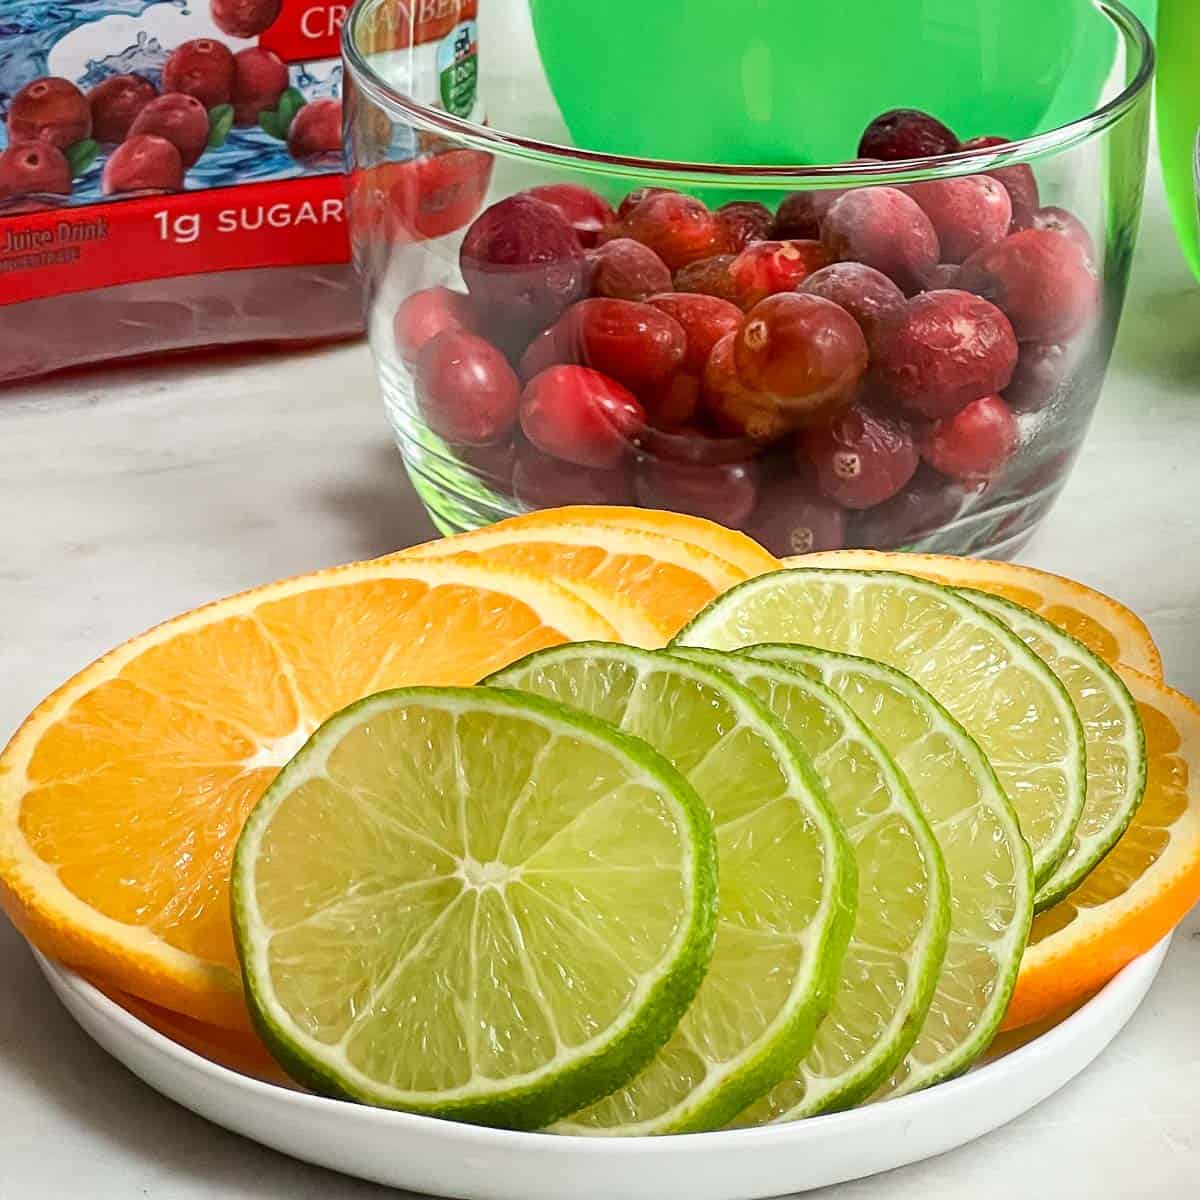 Lime and orange slices fanned out on a small white plate with a clear glass bowl full of bright red fresh cranberries.